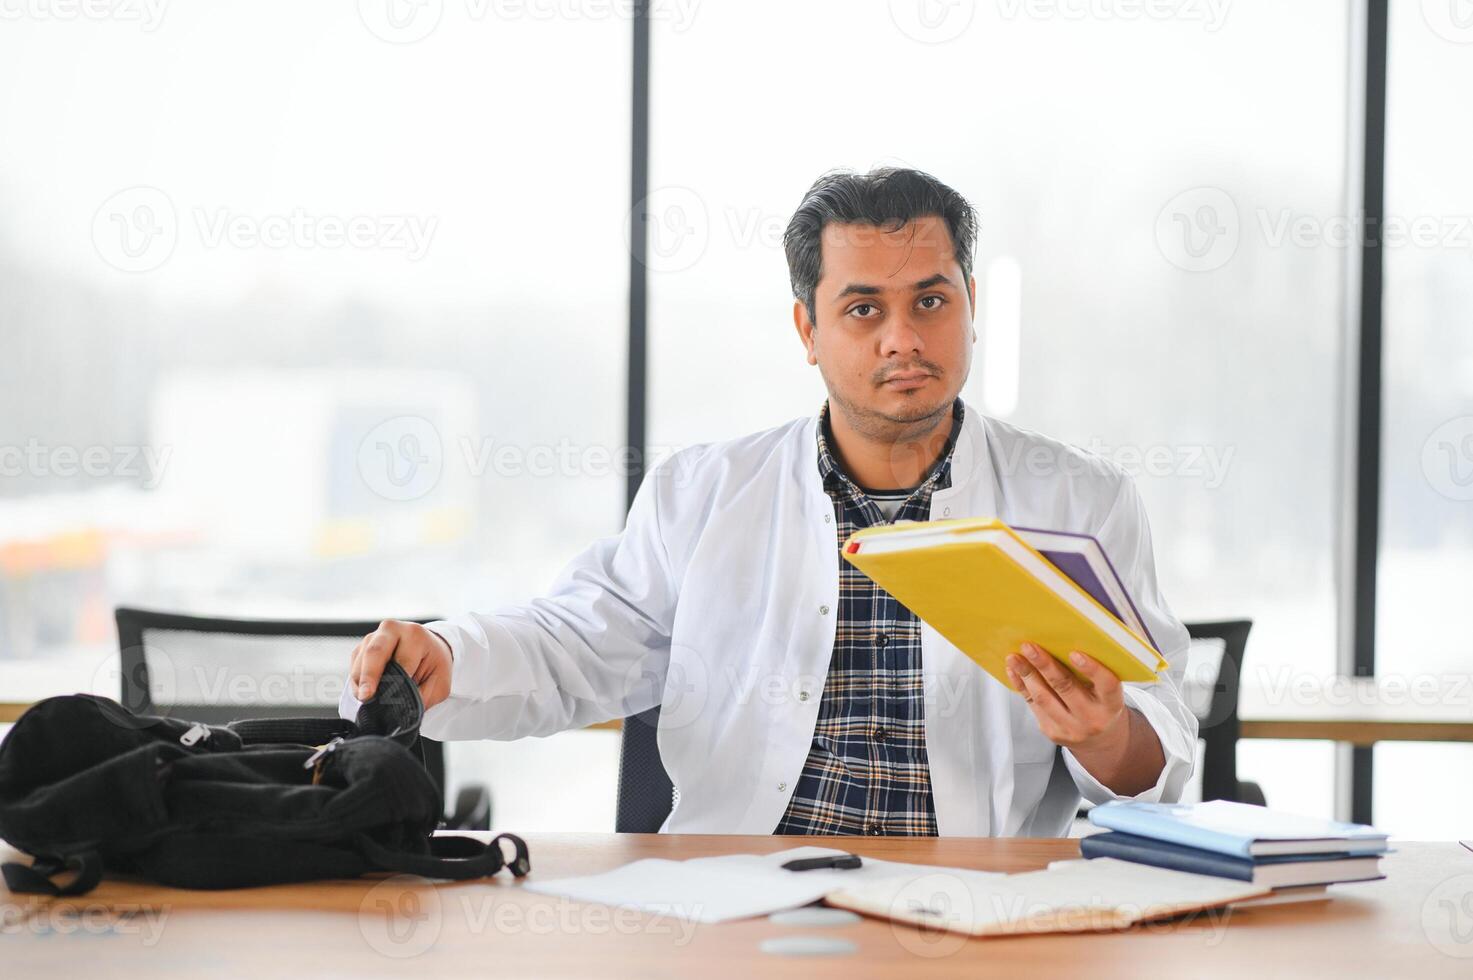 Portrait of a young doctor student studying photo